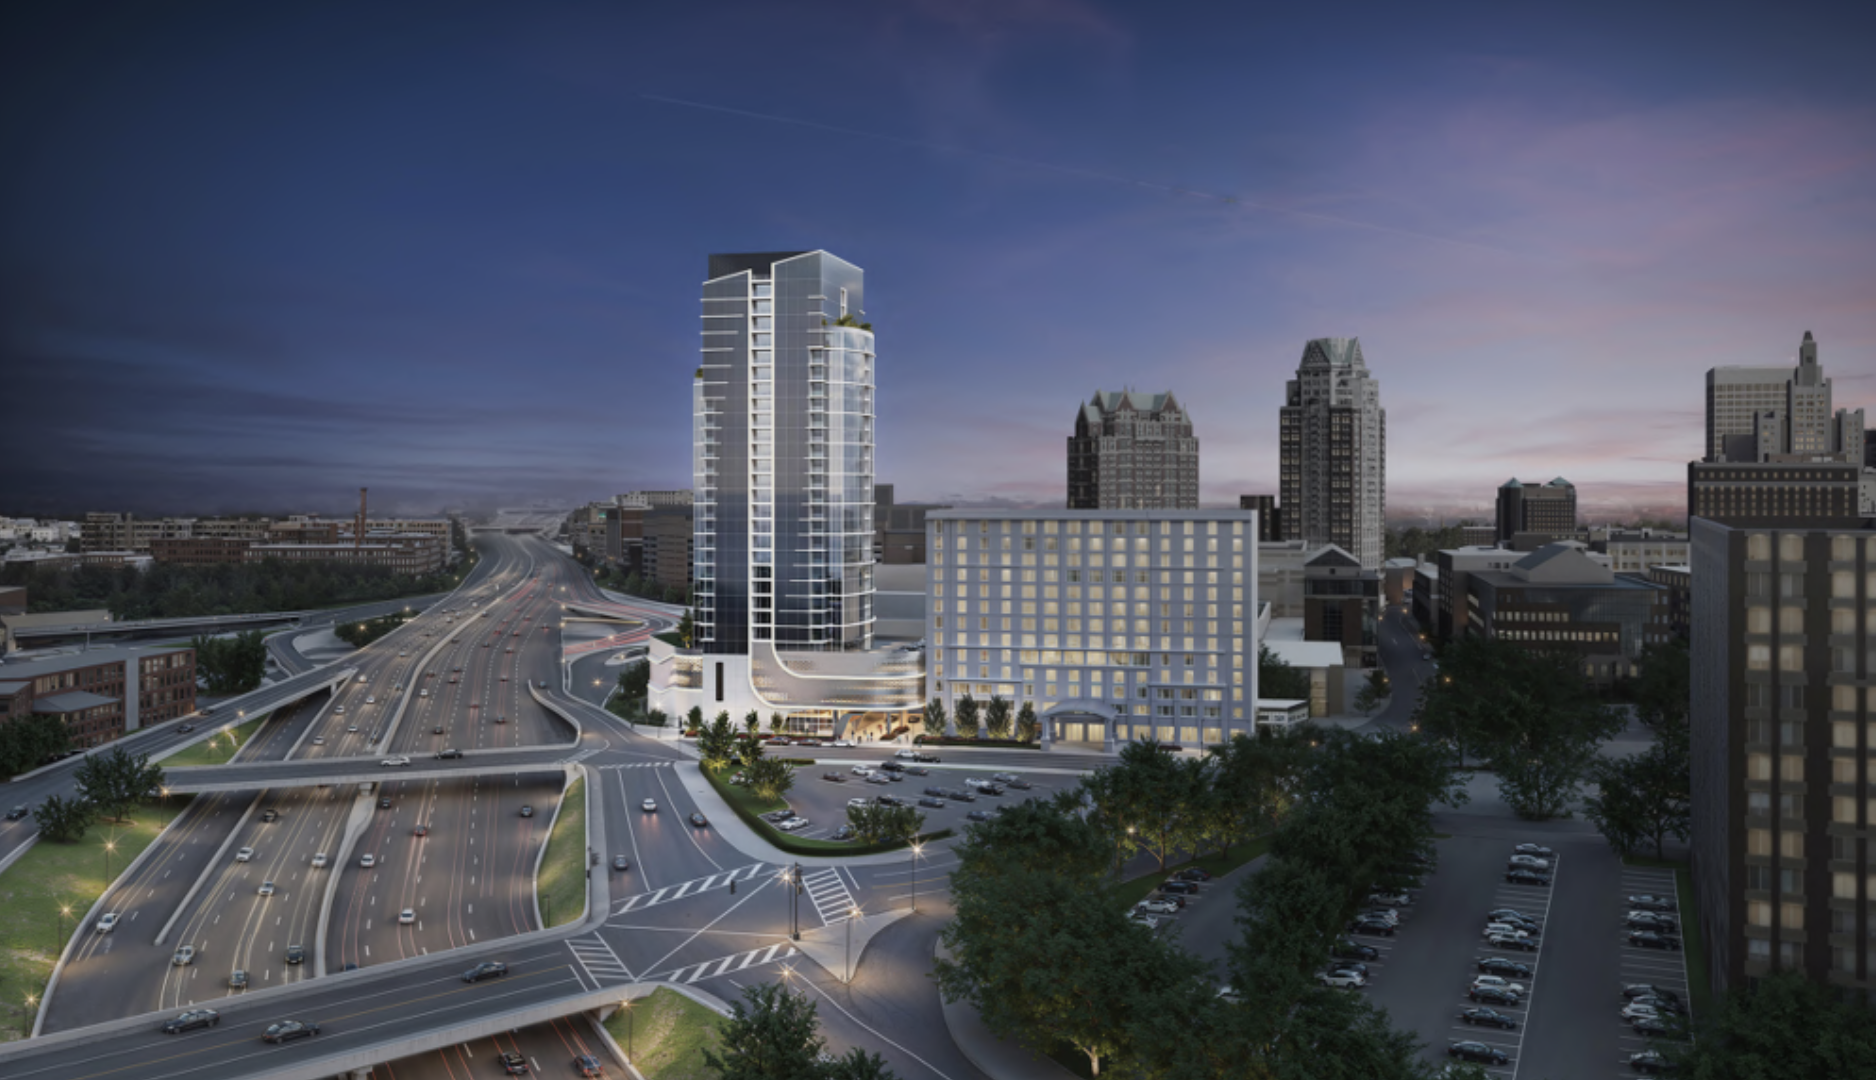 GoLocalProv | Business | Proposed Hilton Tower, Amazing Views of Route 95 - Architecture Critic Will Morgan